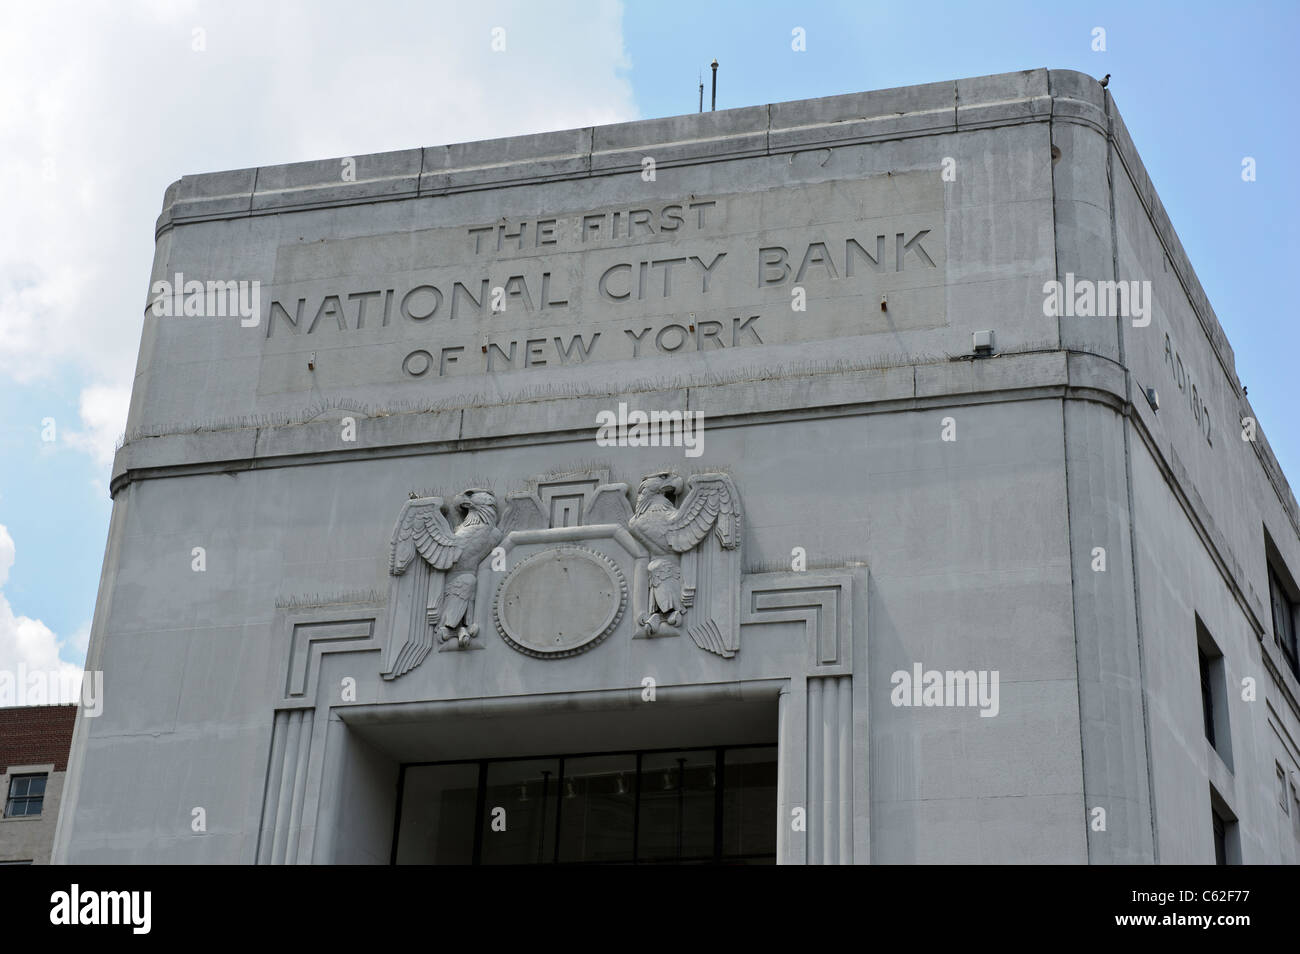 Former National City Bank of New York, Chinatown, New York City, United States. Stock Photo